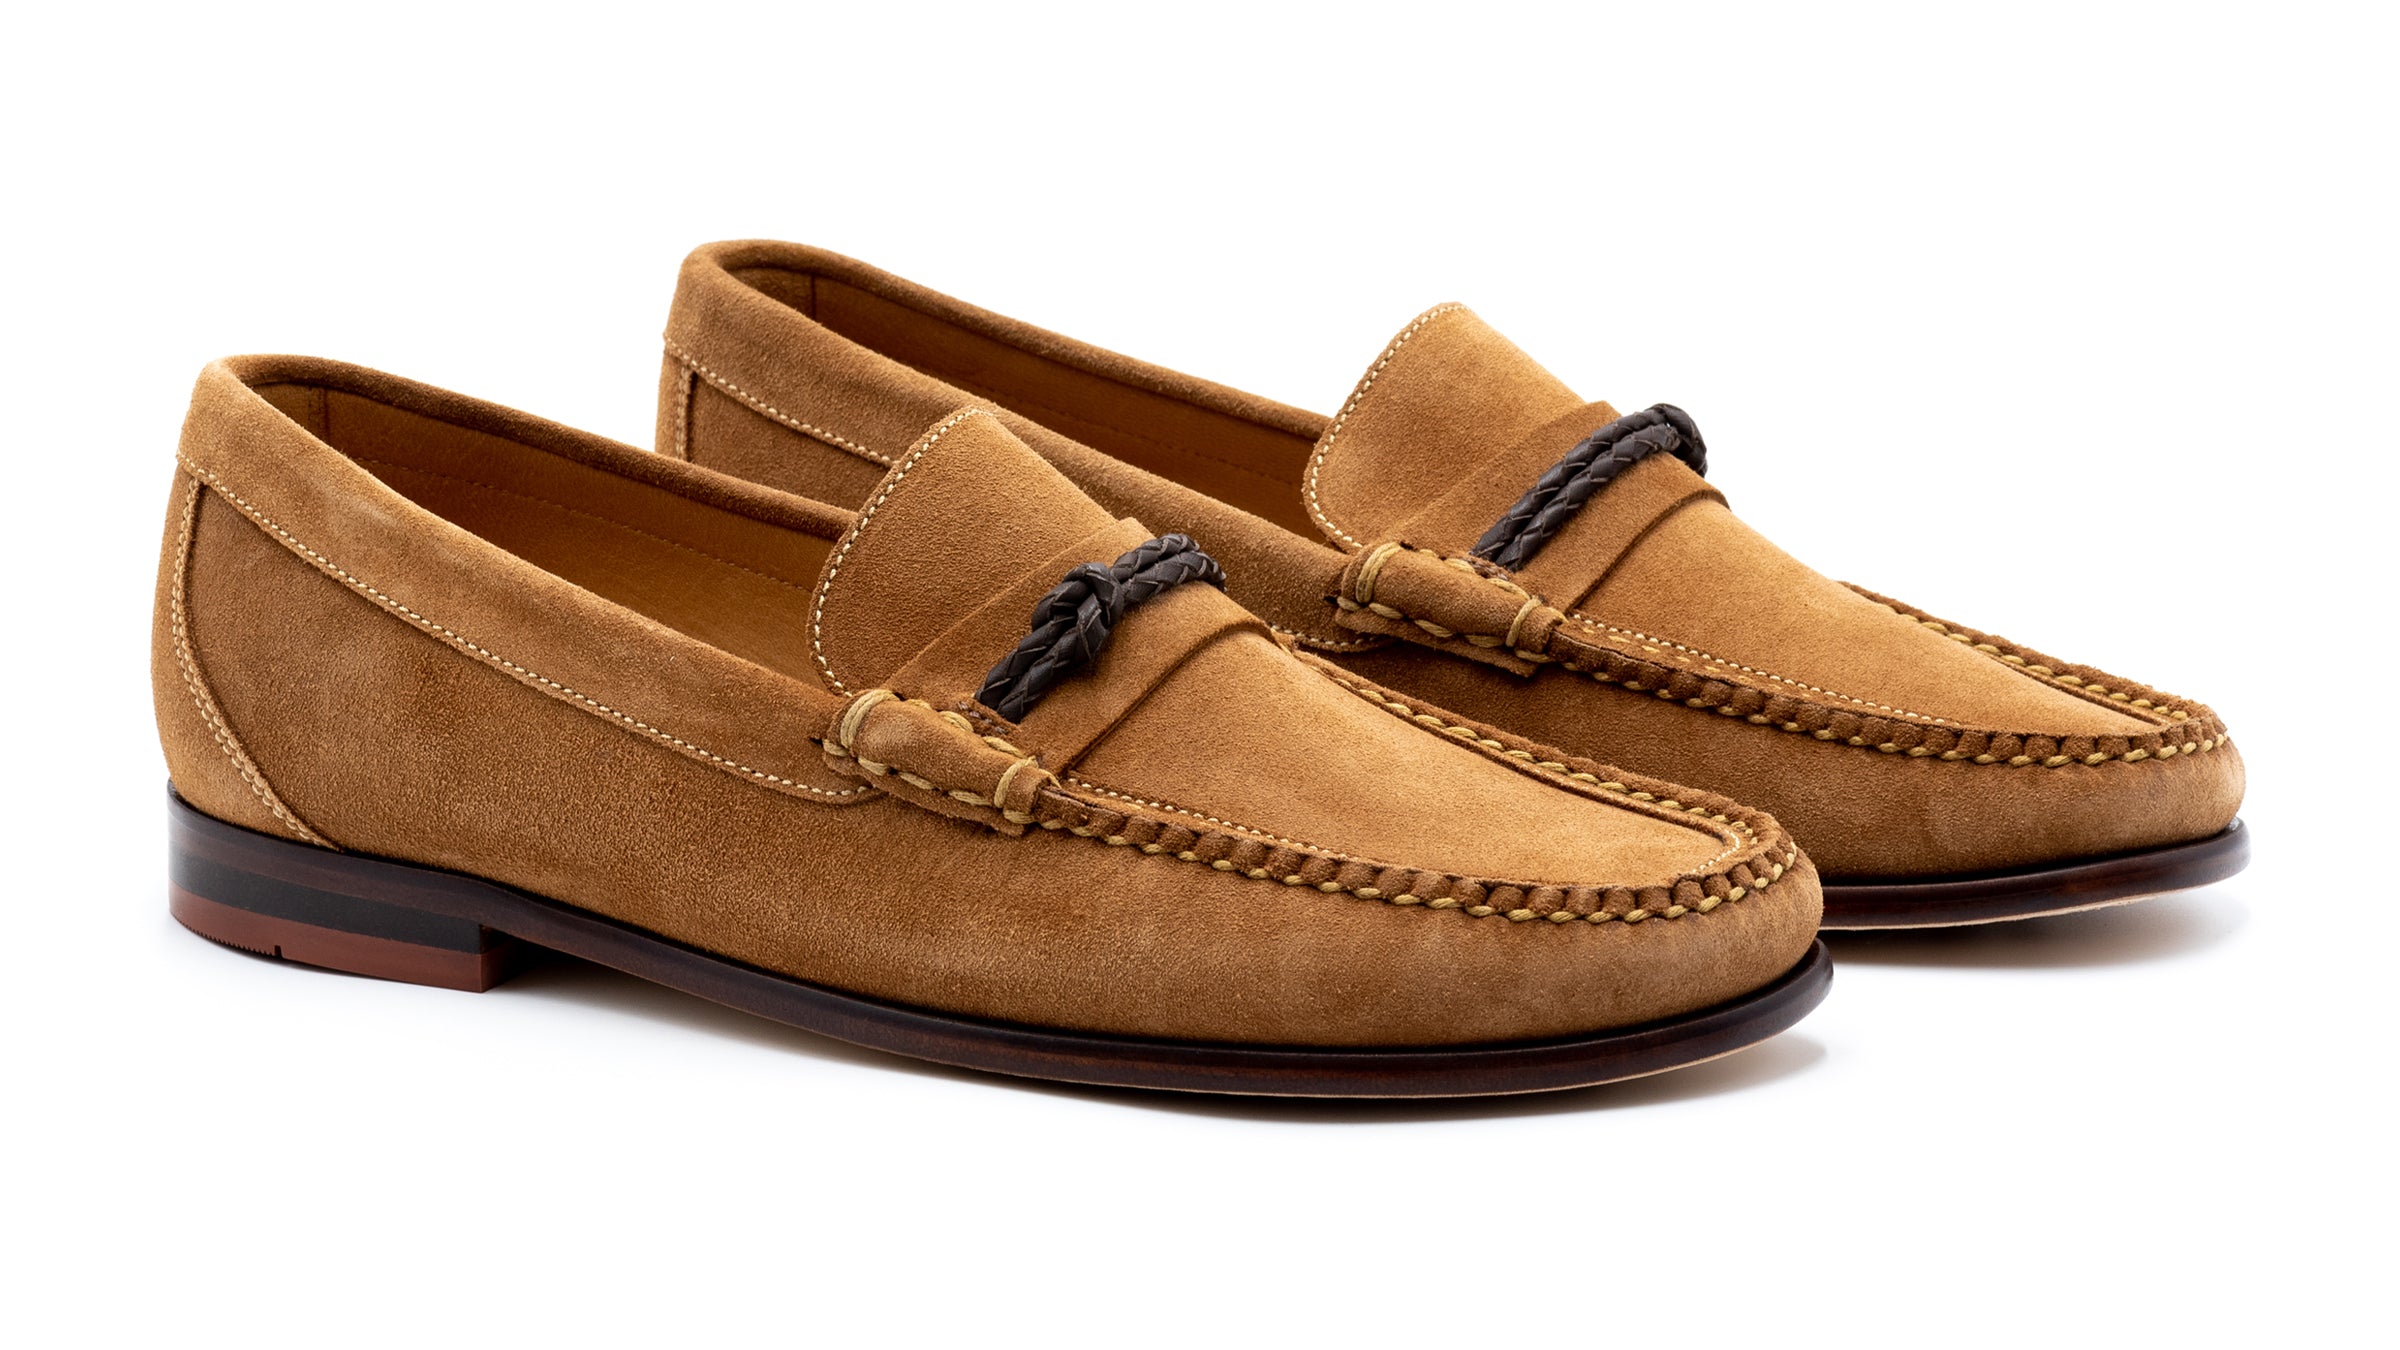 Maxwell Knot Water Repellent Suede Leather Braided Knot Loafers Fren | Martin Dingman